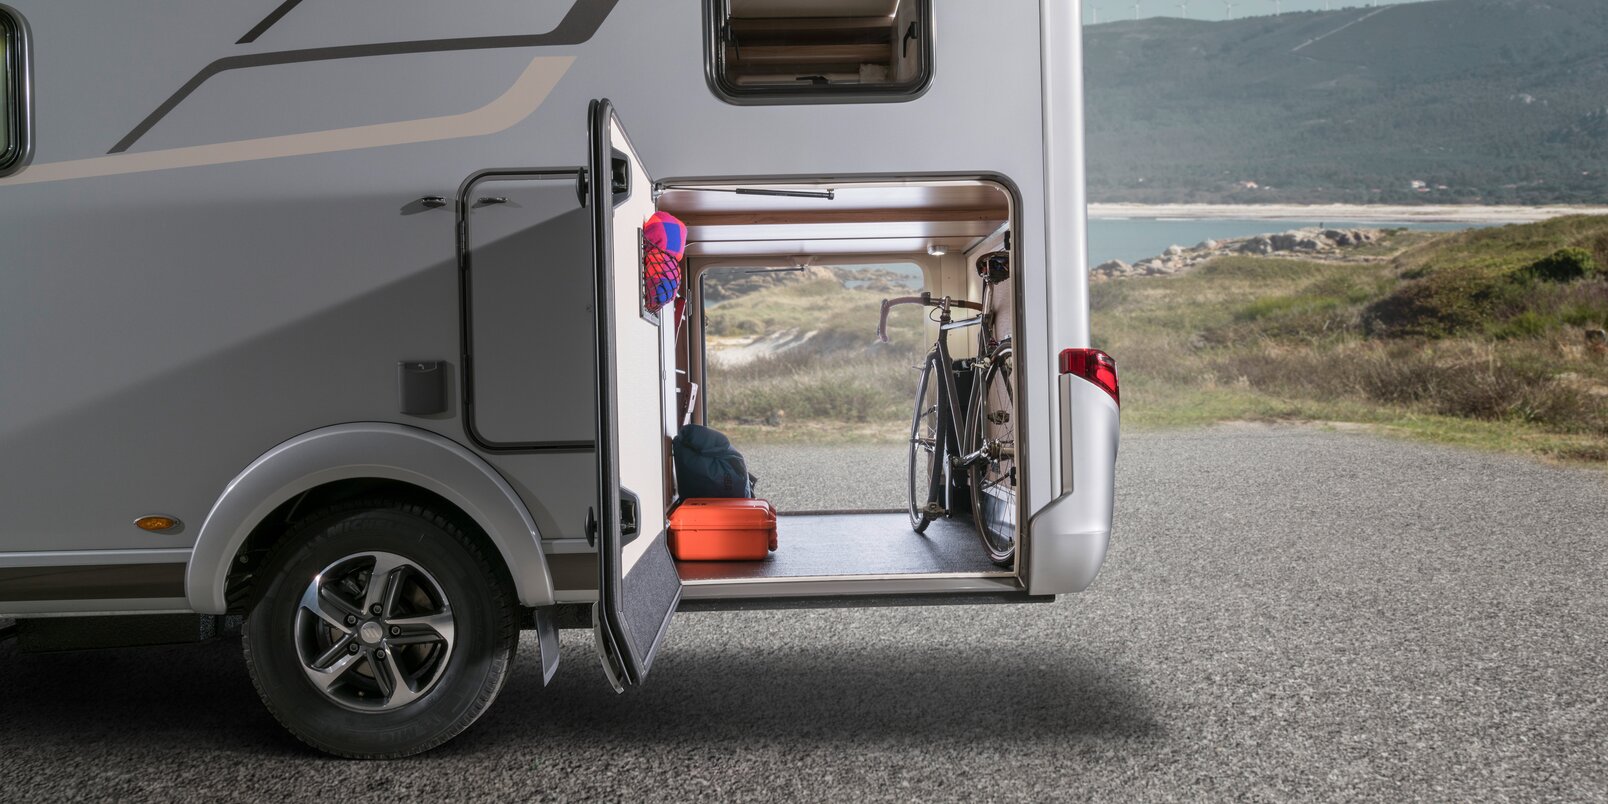 The rear garage of the HYMER Exsis-i, loaded with a red suitcase and bag, has a view of the rocky coast and the blue sky